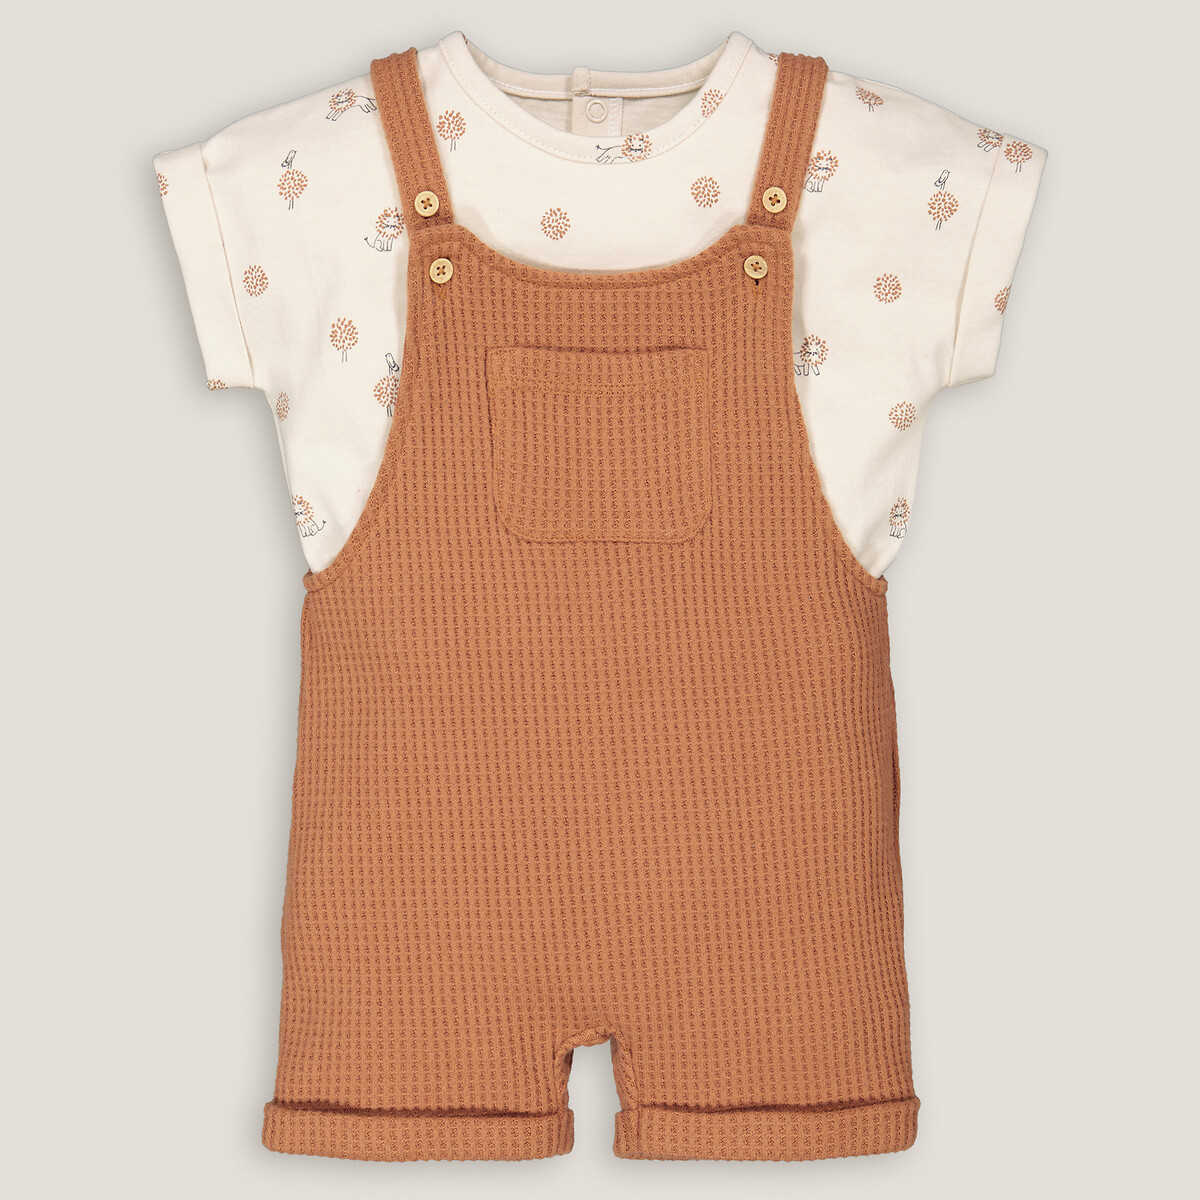 T-Shirt/Short Dungarees Outfit